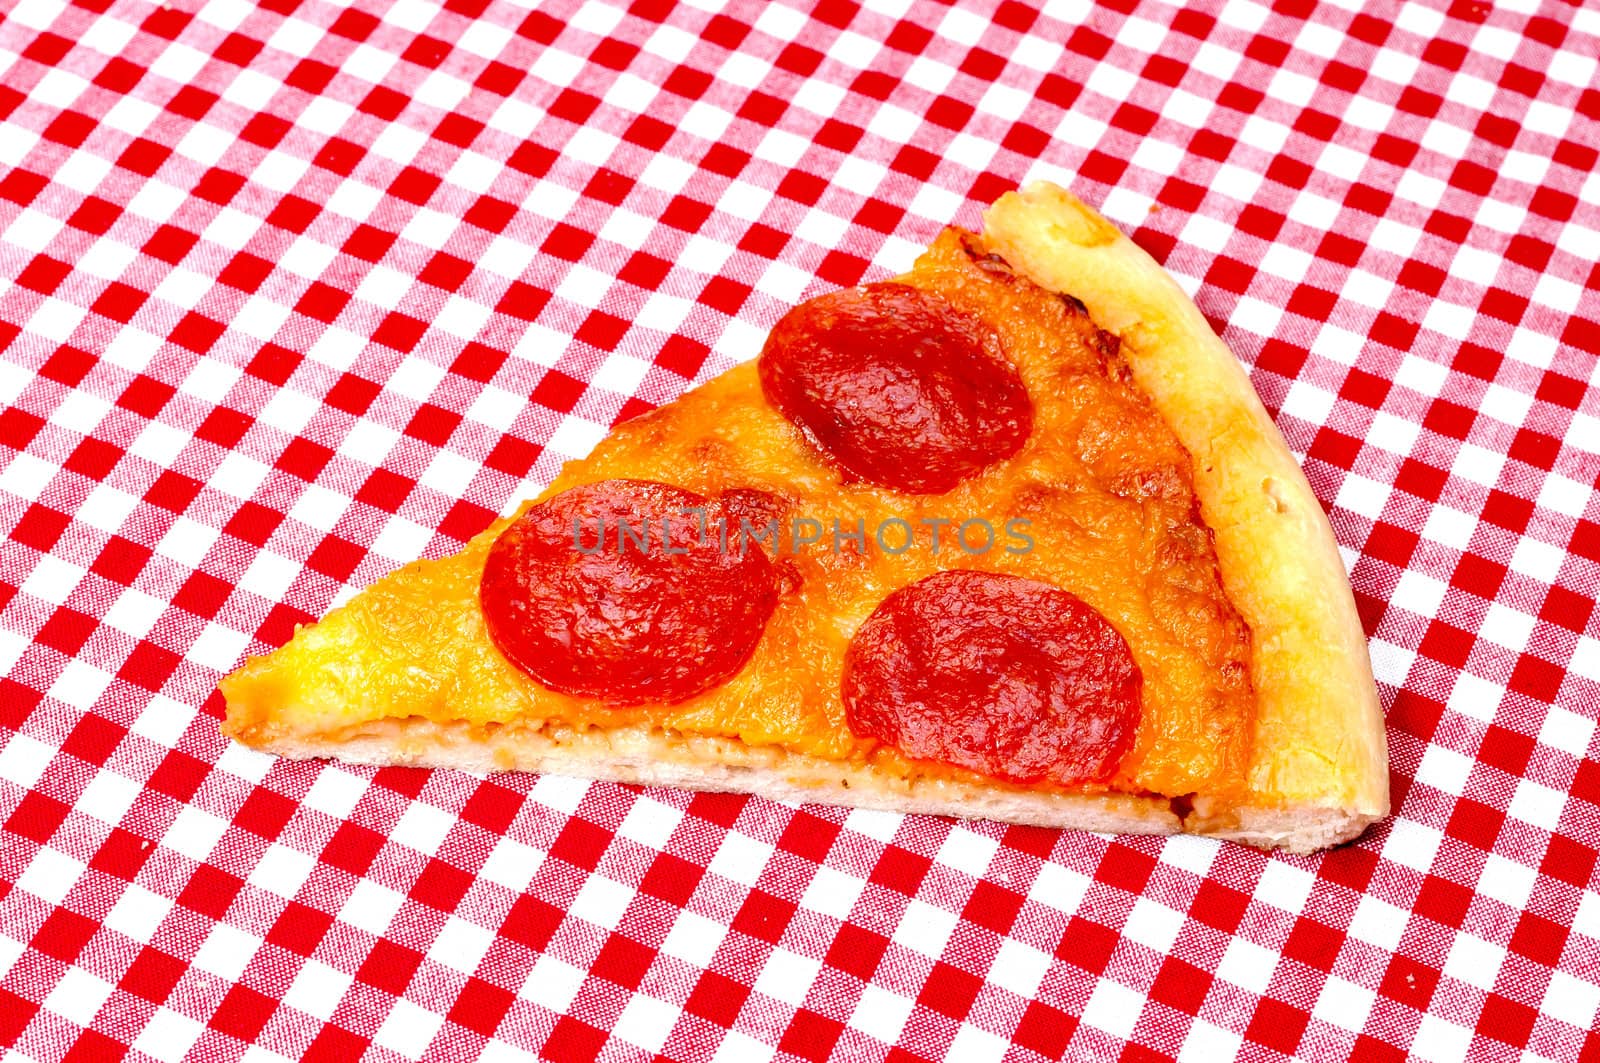 Pepperoni Pizza Slice on Red Gingham by dehooks